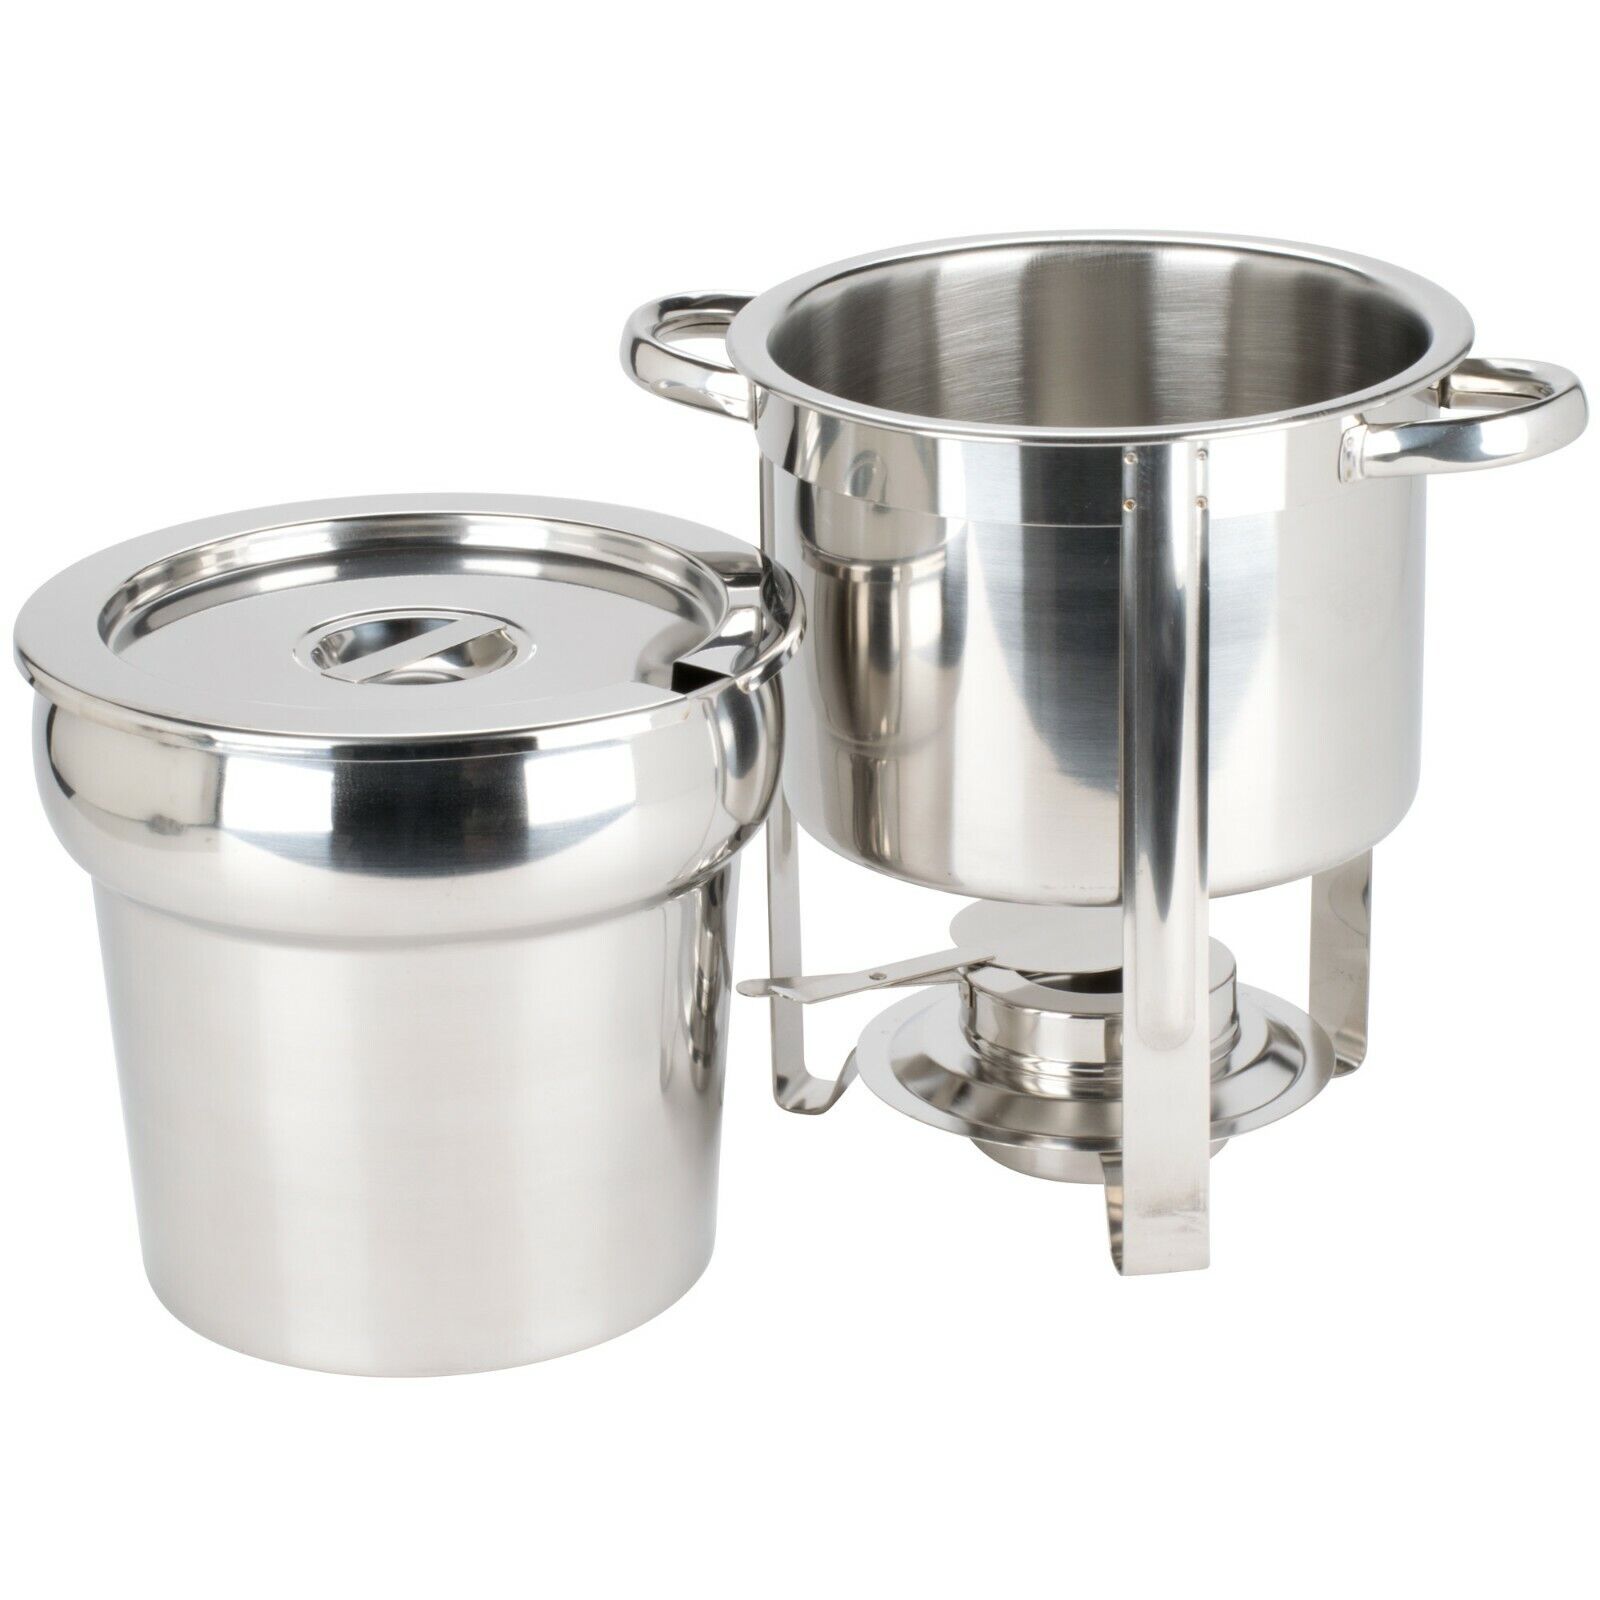 2 PACK Stainless Steel Choice Deluxe 7 Qt. Round Soup Chafer / Marmite Chafer Choice Does Not Apply - фотография #4